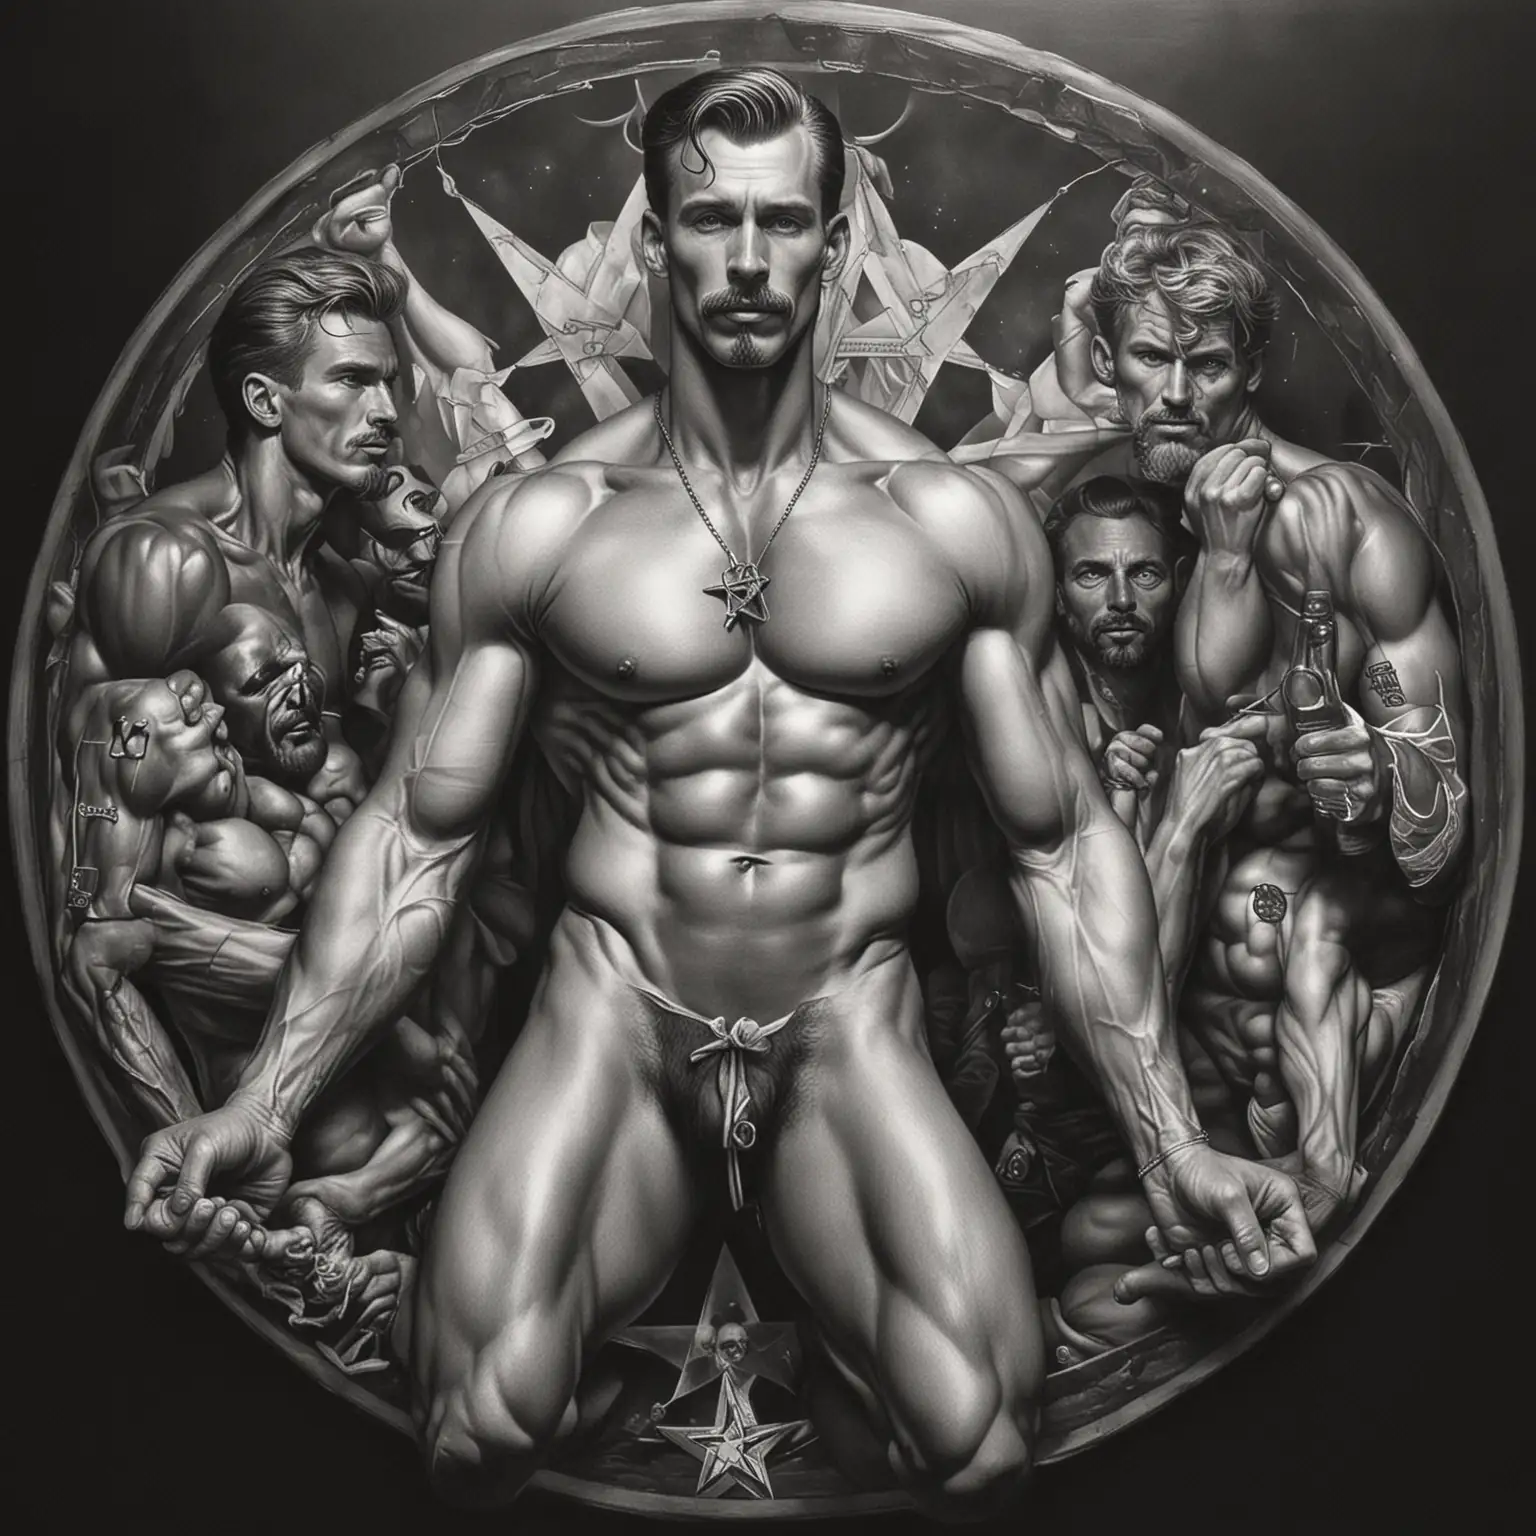 Erotic Tom of Finland Illustration with Kabbalistic Themes and Group Interaction